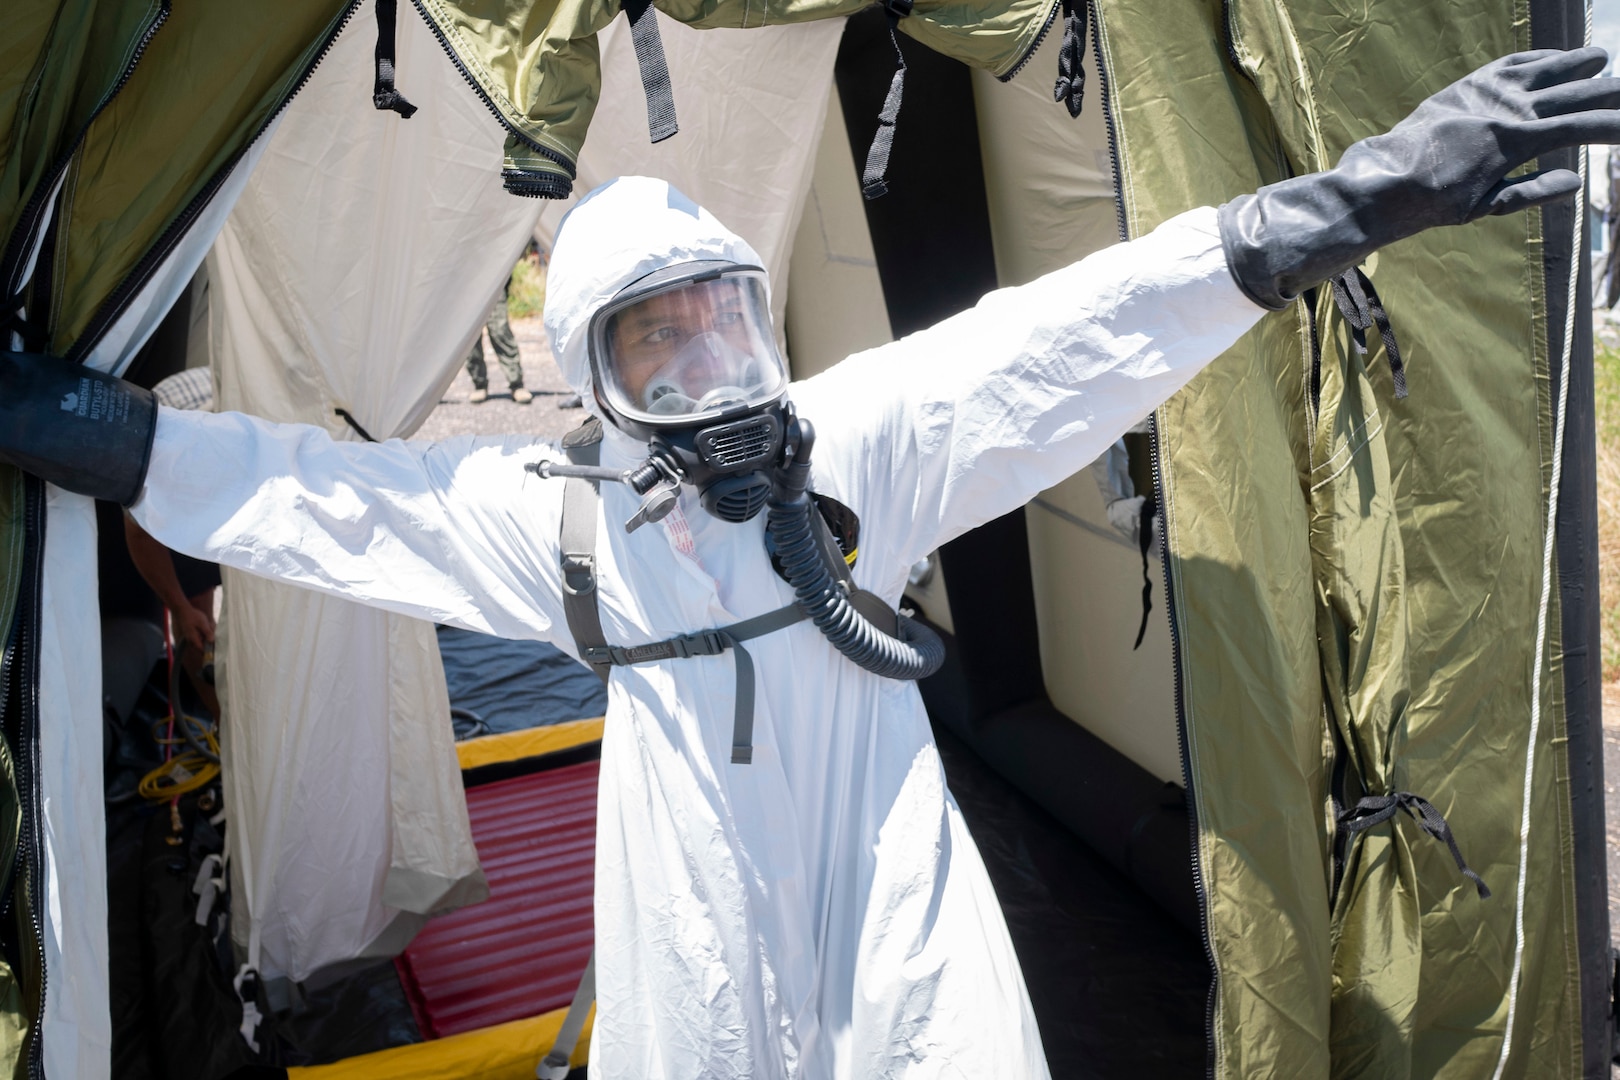 Staff Sgt. James Almero, 154th Medical Group Detachment 1, search extraction rescue operations technician, exits a decontamination tent